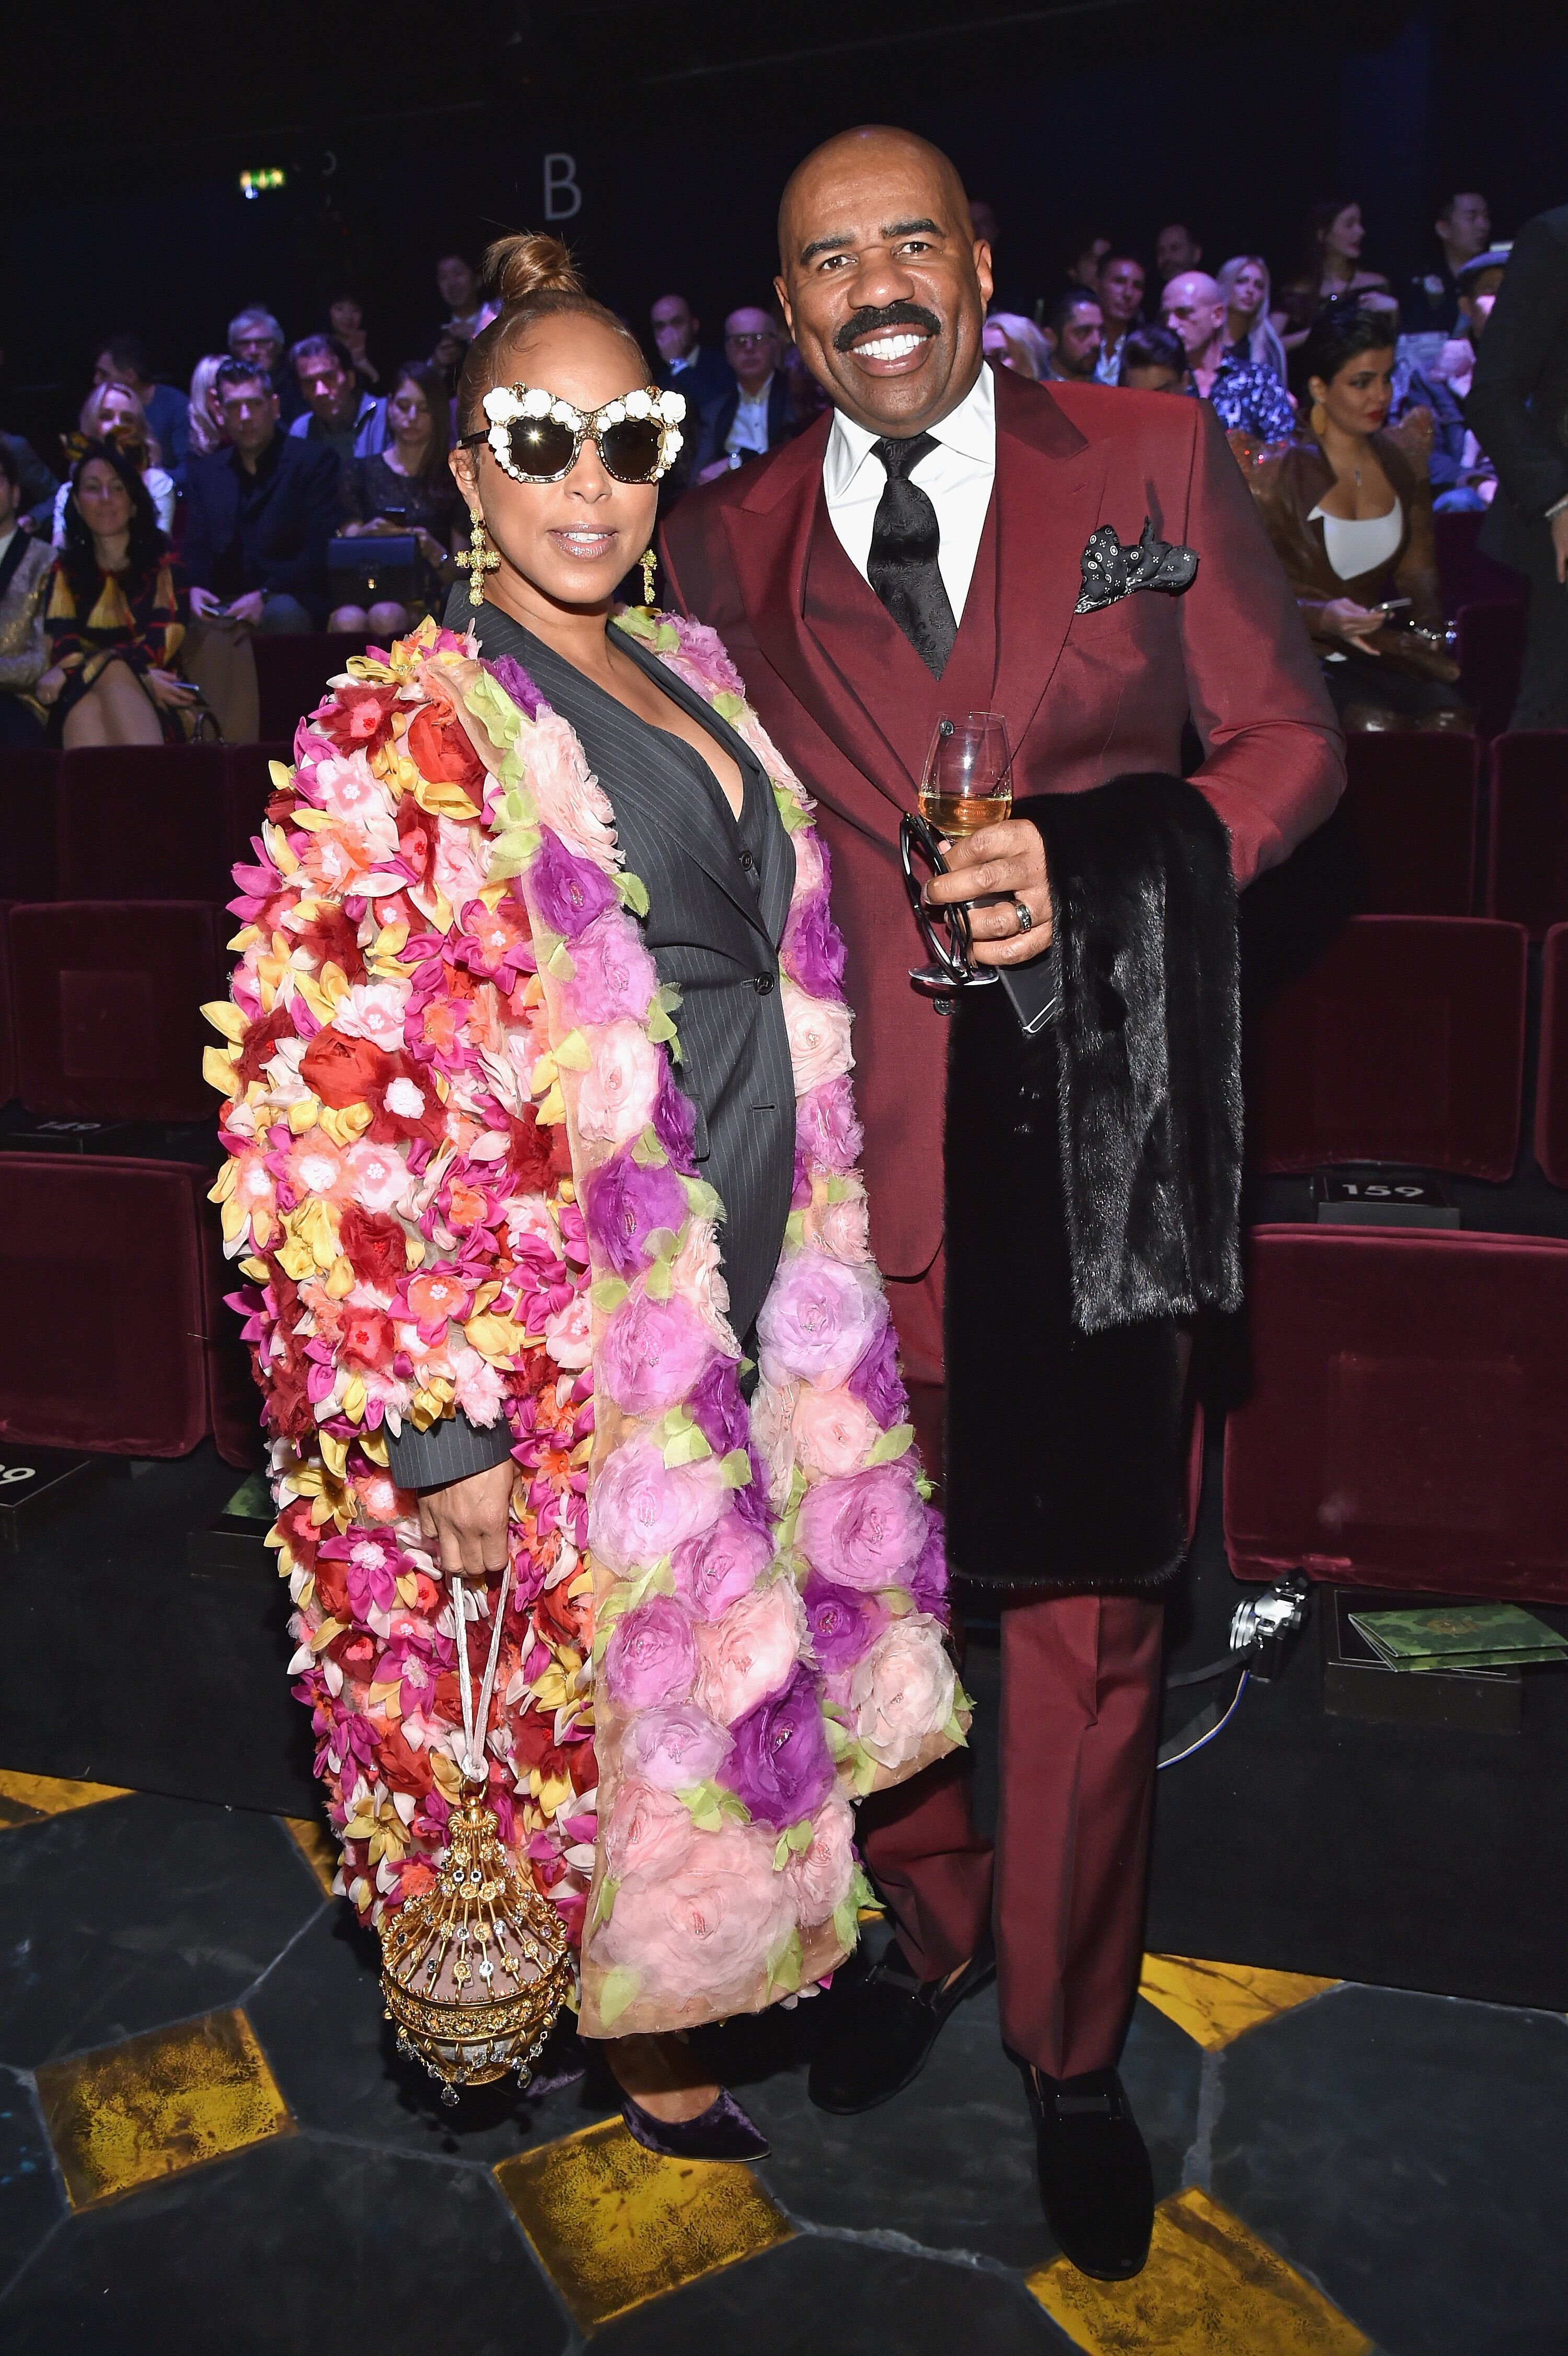  Marjorie Bridges-Woods and Steve Harvey attend the Dolce & Gabbana show during Milan Men's Fashion Week Fall/Winter 2017/18 on January 14, 2017 in Milan, Italy. | Source: Getty Images